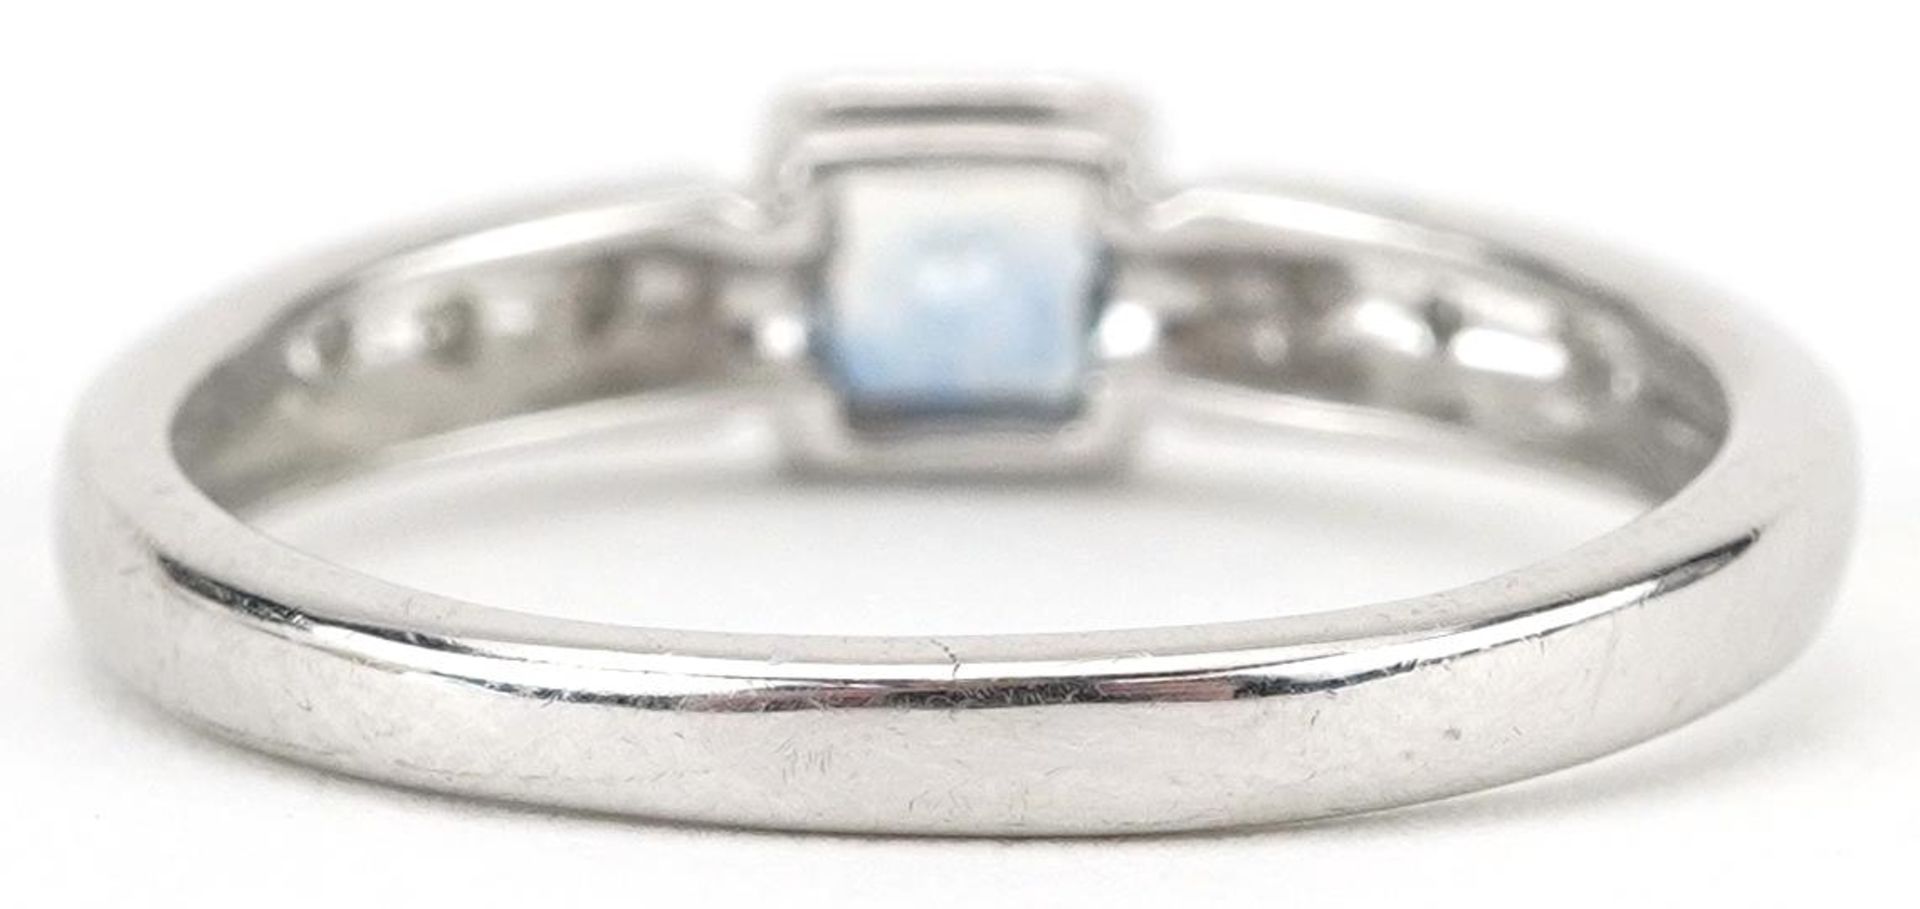 9ct white gold princess cut sapphire ring with diamond set shoulders, size N, 2.1g - Image 2 of 4